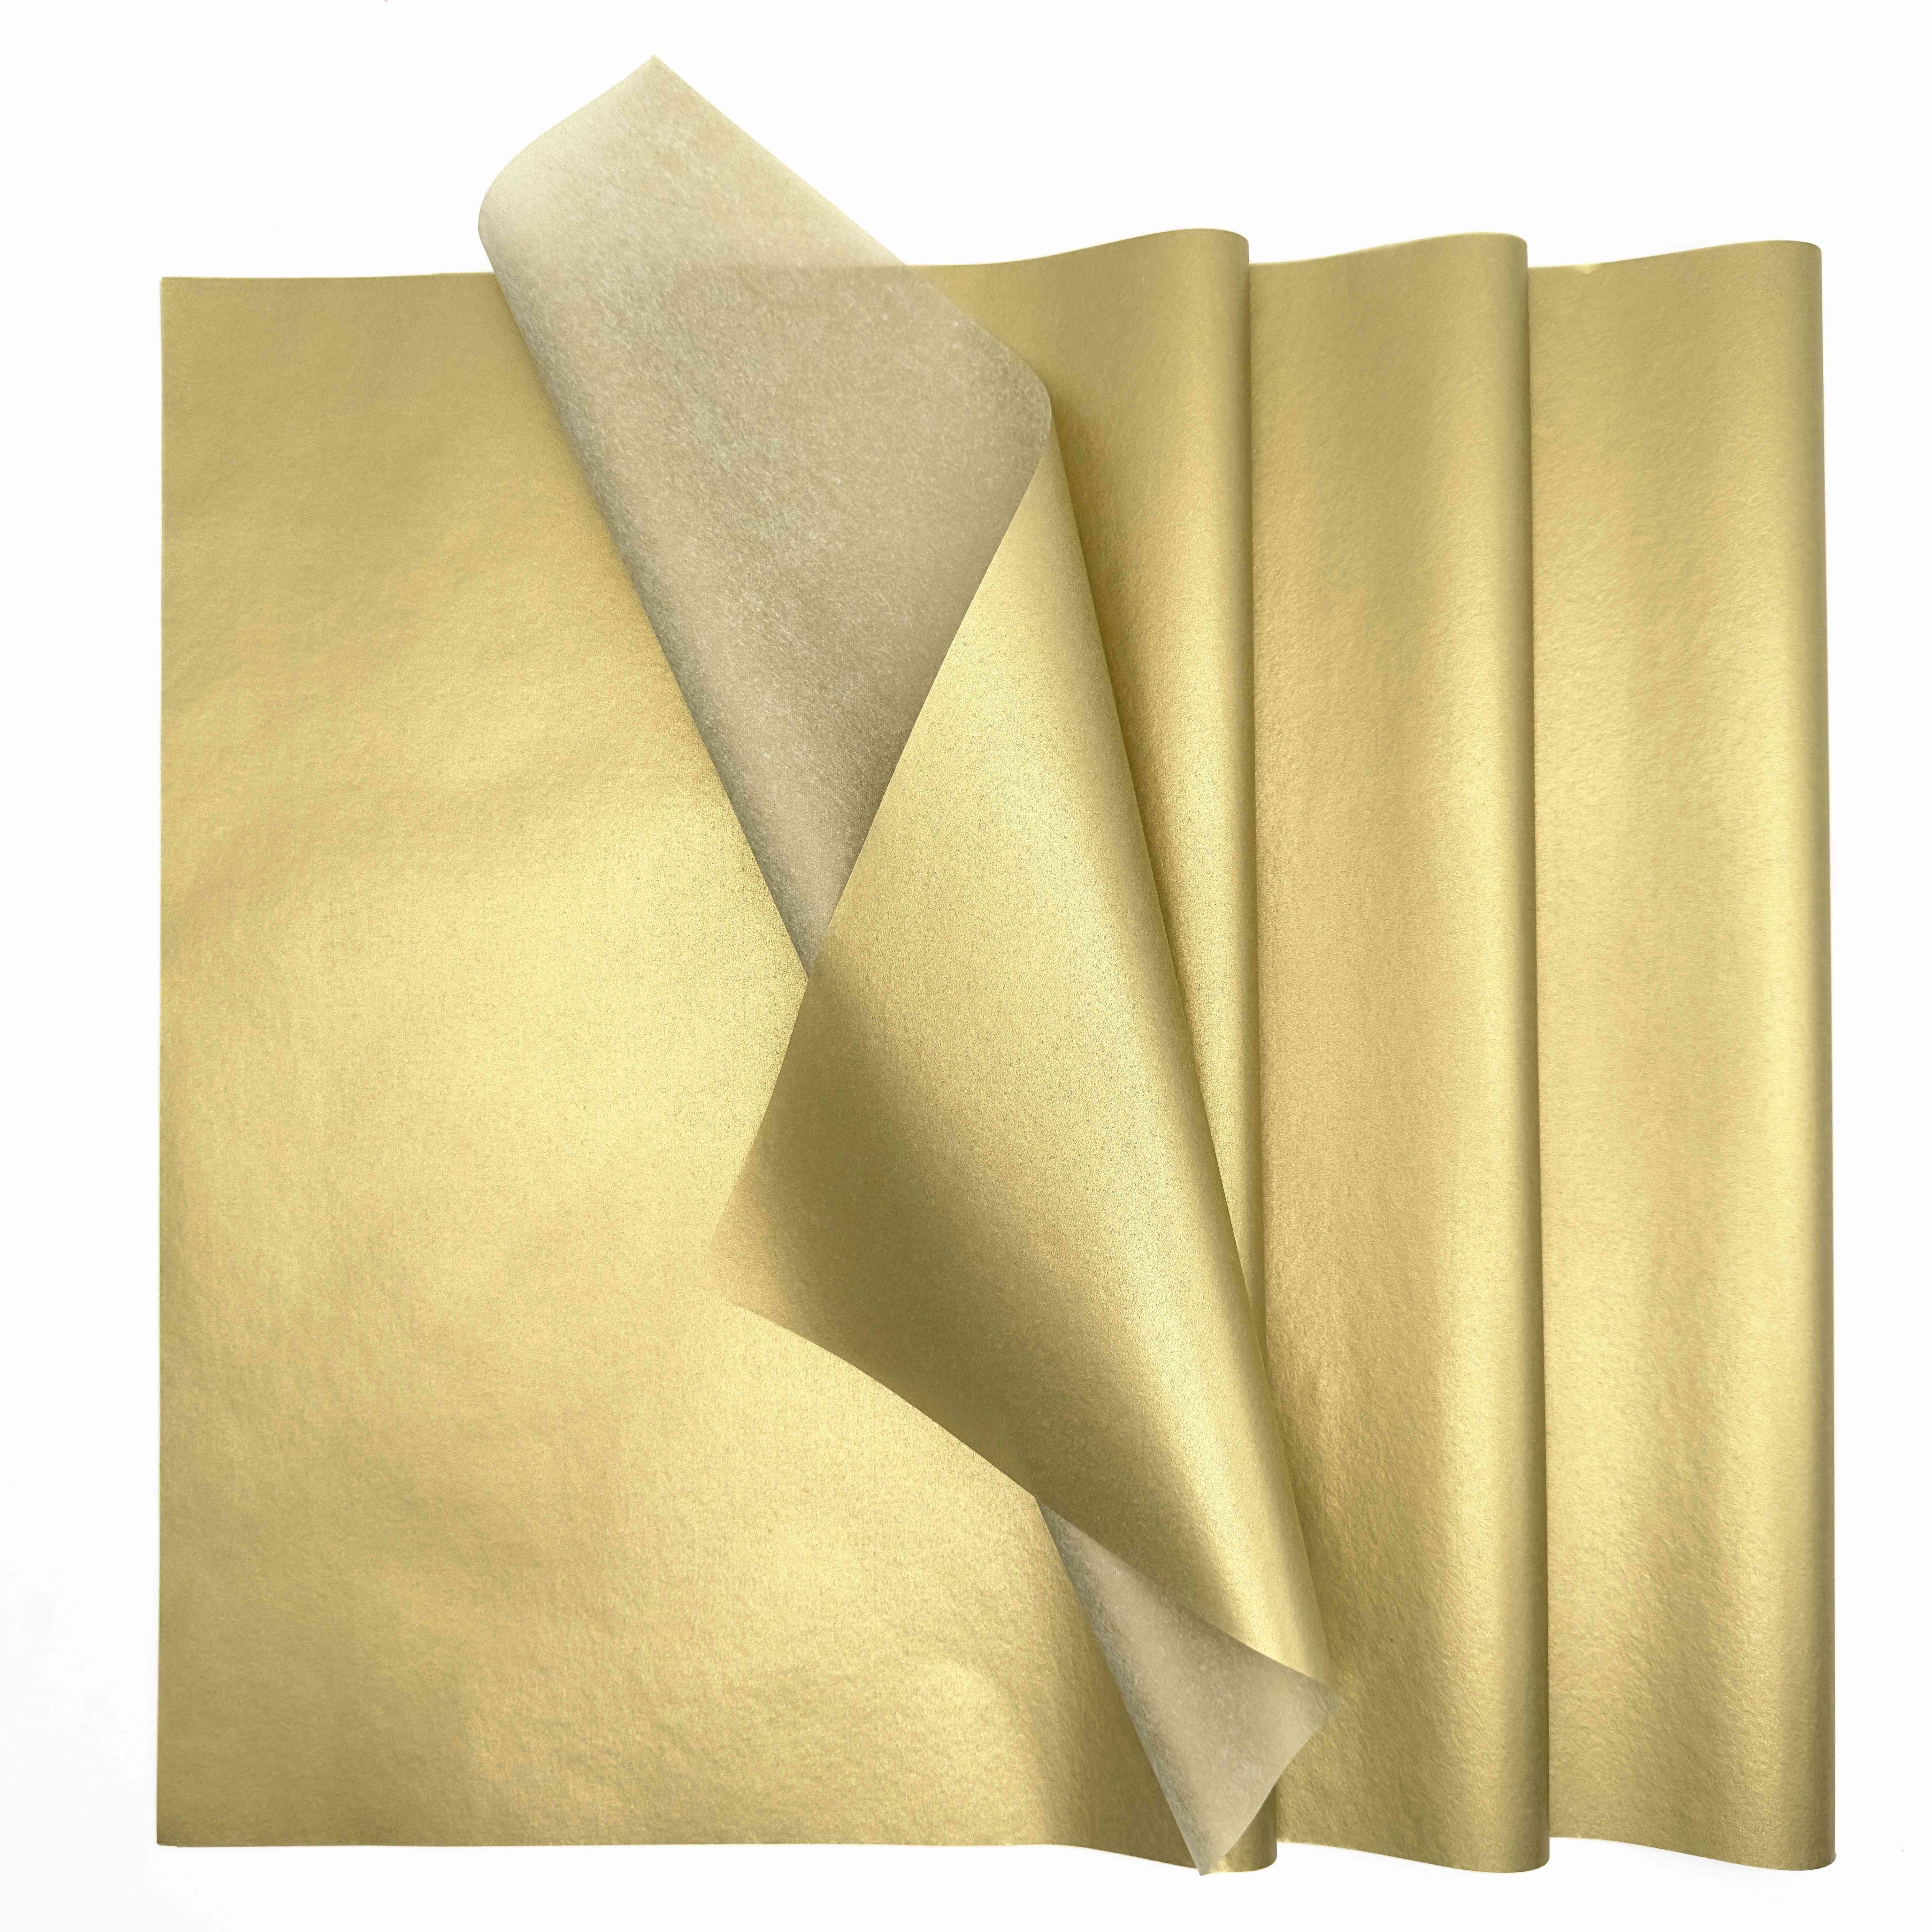 

20 Sheets Golden High-end Gift Wrapping Paper Large Size Valentine's Day Birthday Christmas Couple Bouquet Wrapping Paper Premium Sense Gift Paper